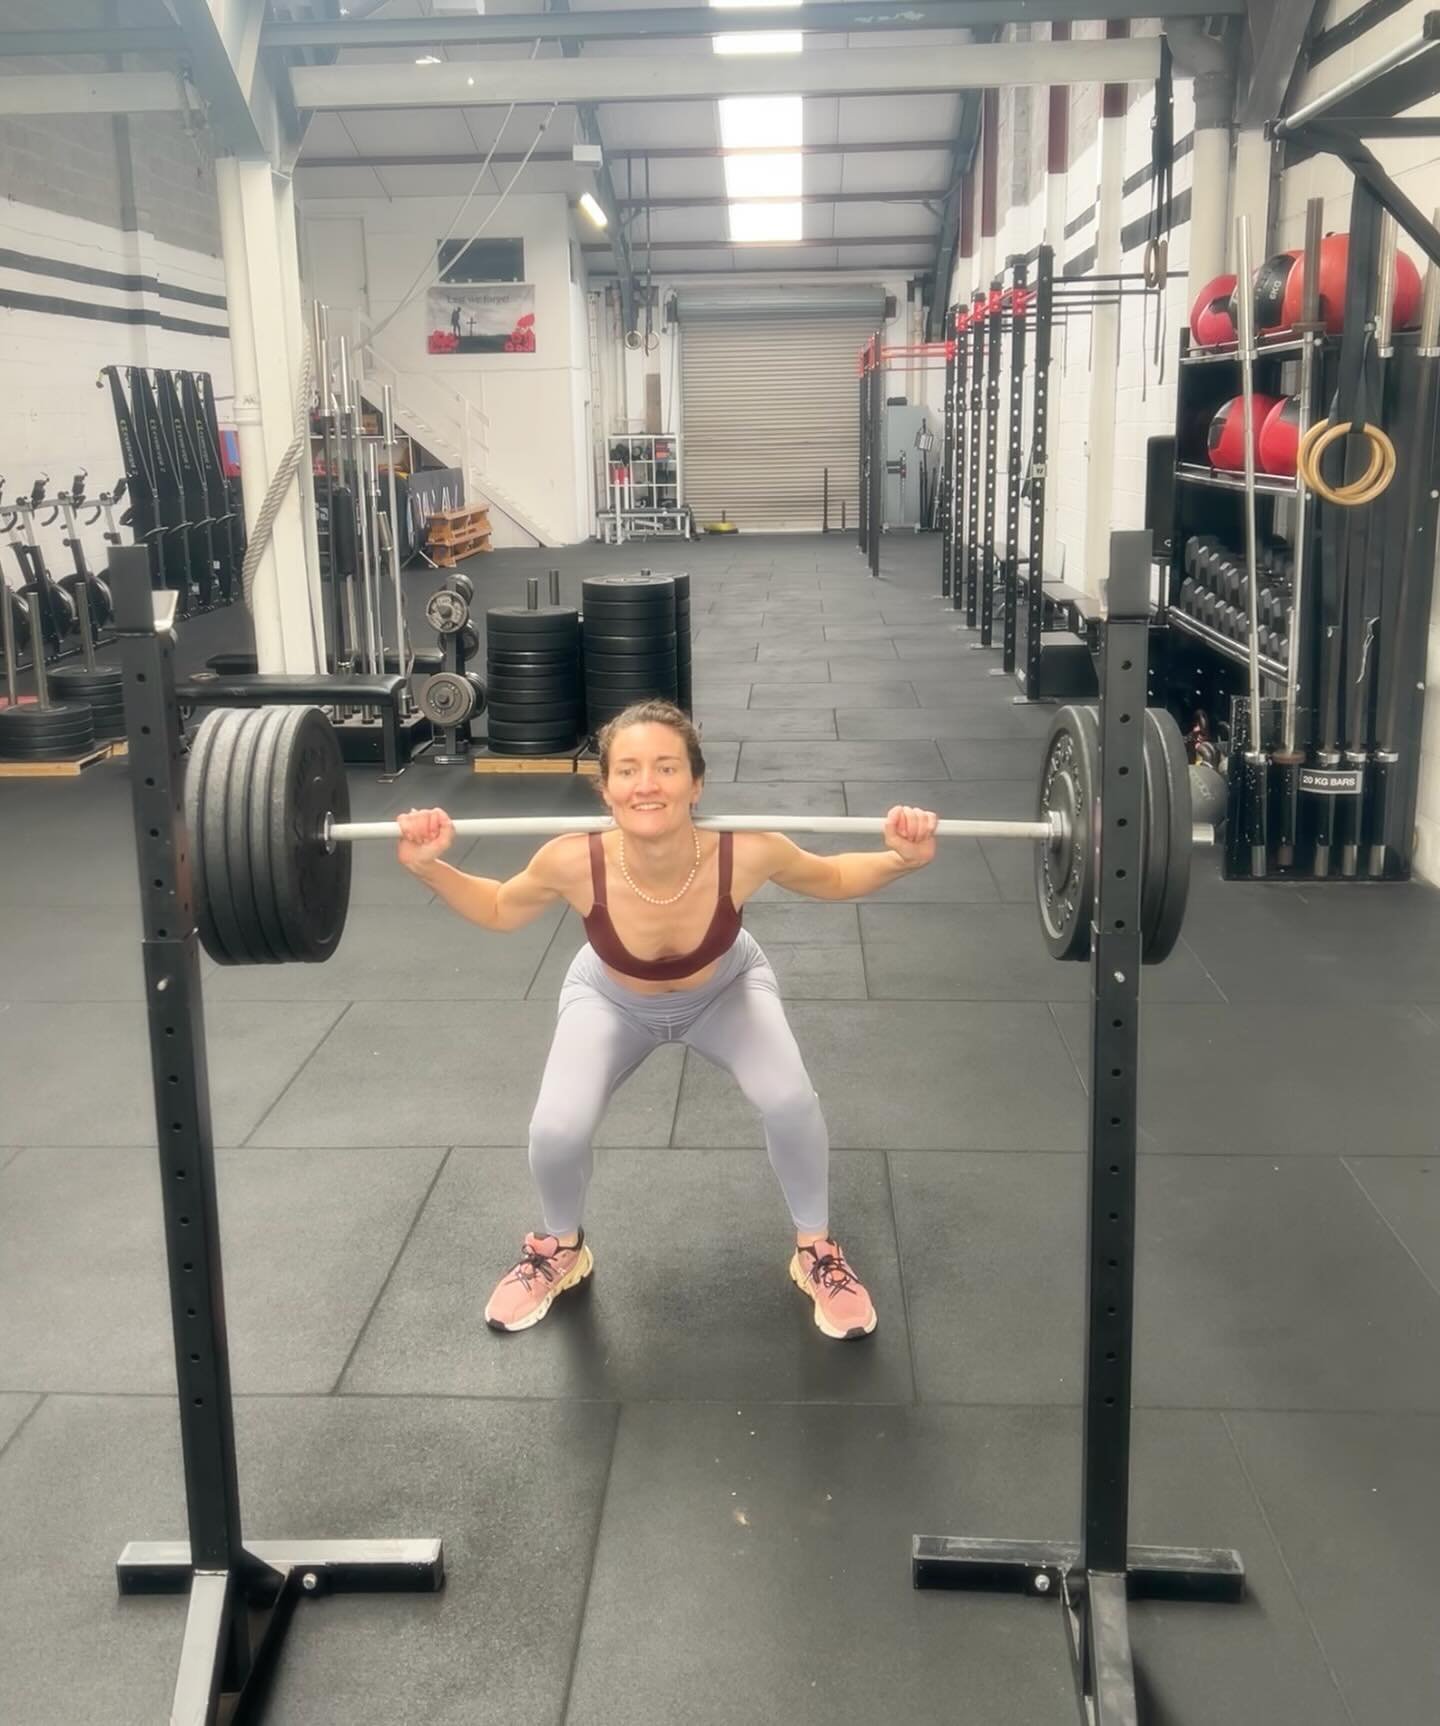 Week 2 at CrossFit 😀

Technique not great, but feeling stronger already 🏋️&zwj;♀️

When it comes to physical activity it&rsquo;s important to get a balance of aerobic (getting your heart rate up), strength (using resistance to build muscle strength